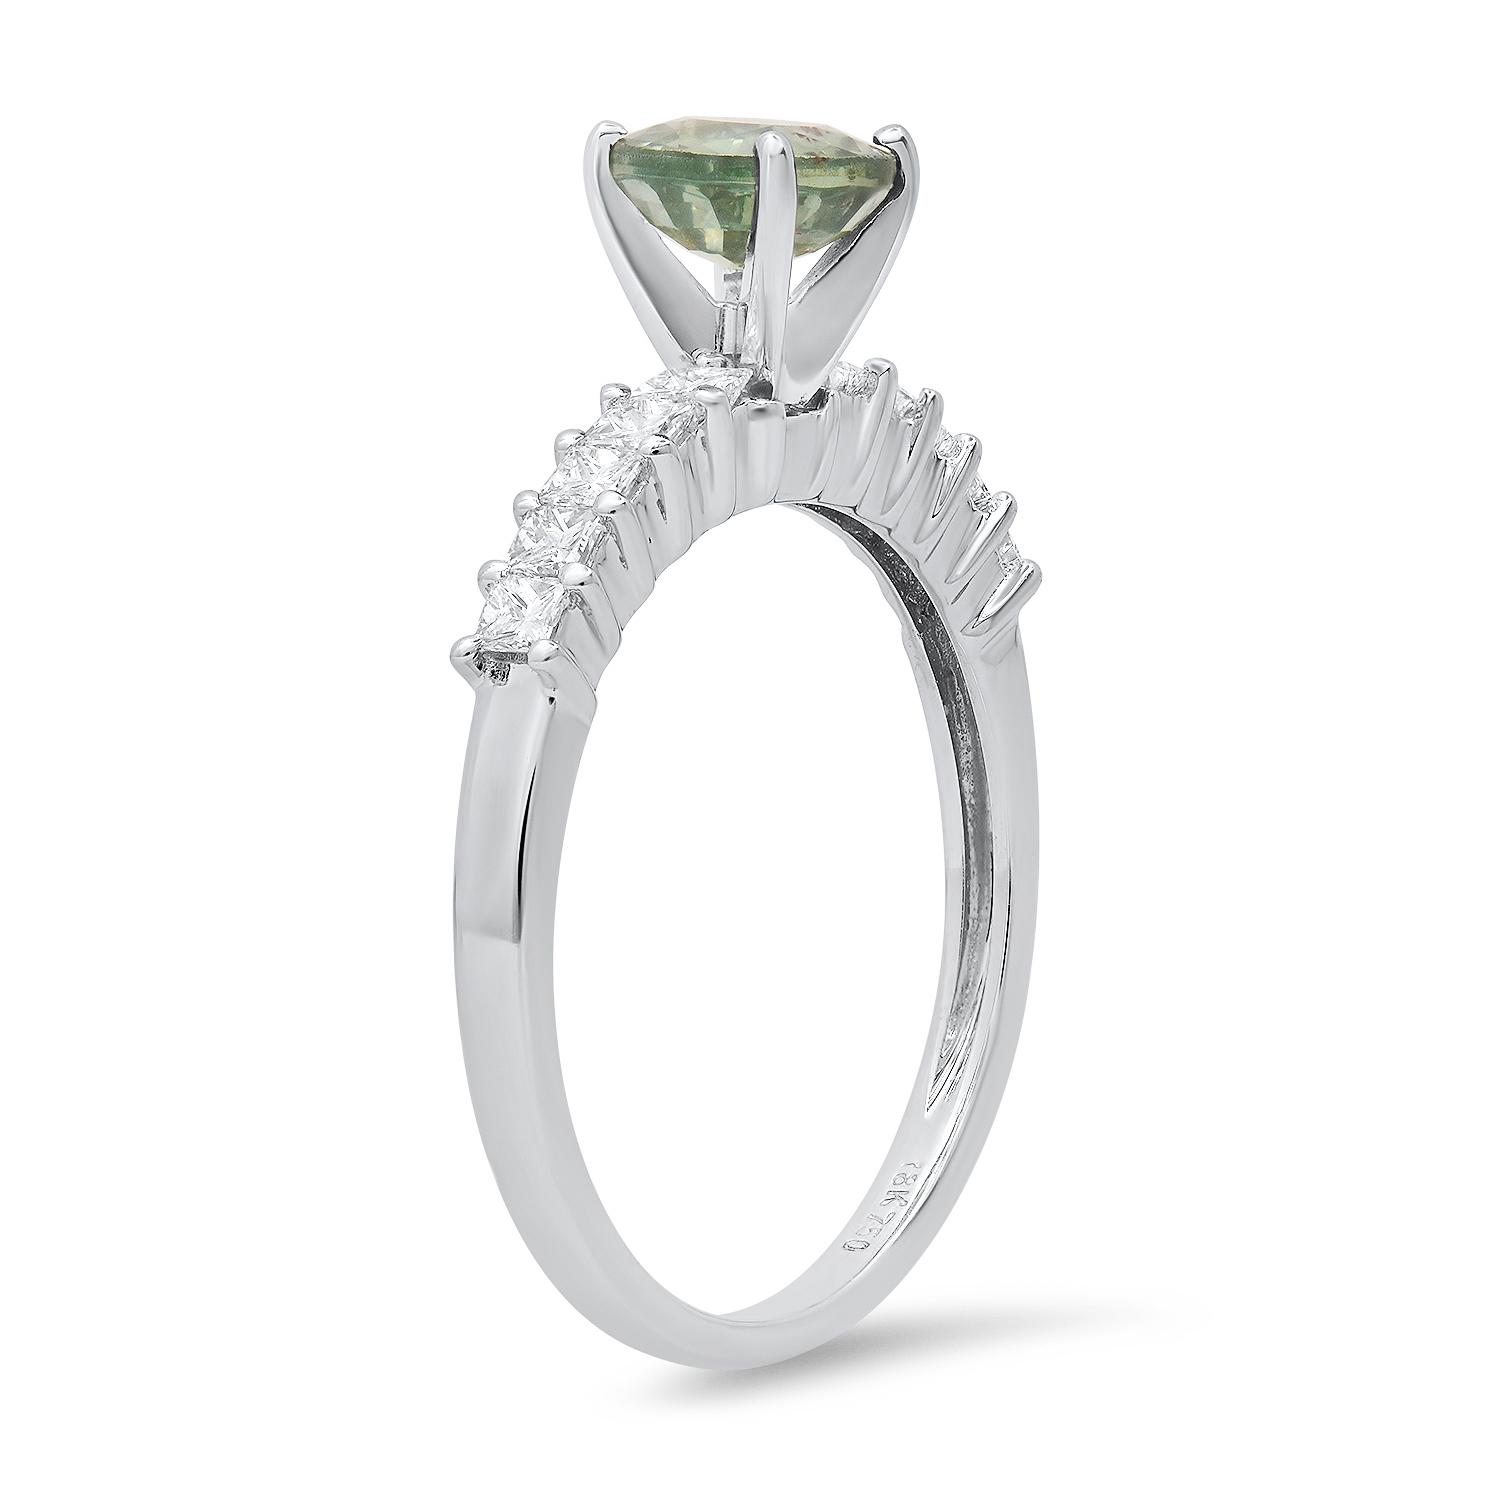 18K White Gold Setting with 1.1ct Green Saphire and 0.60ct Diamond Ladies Ring